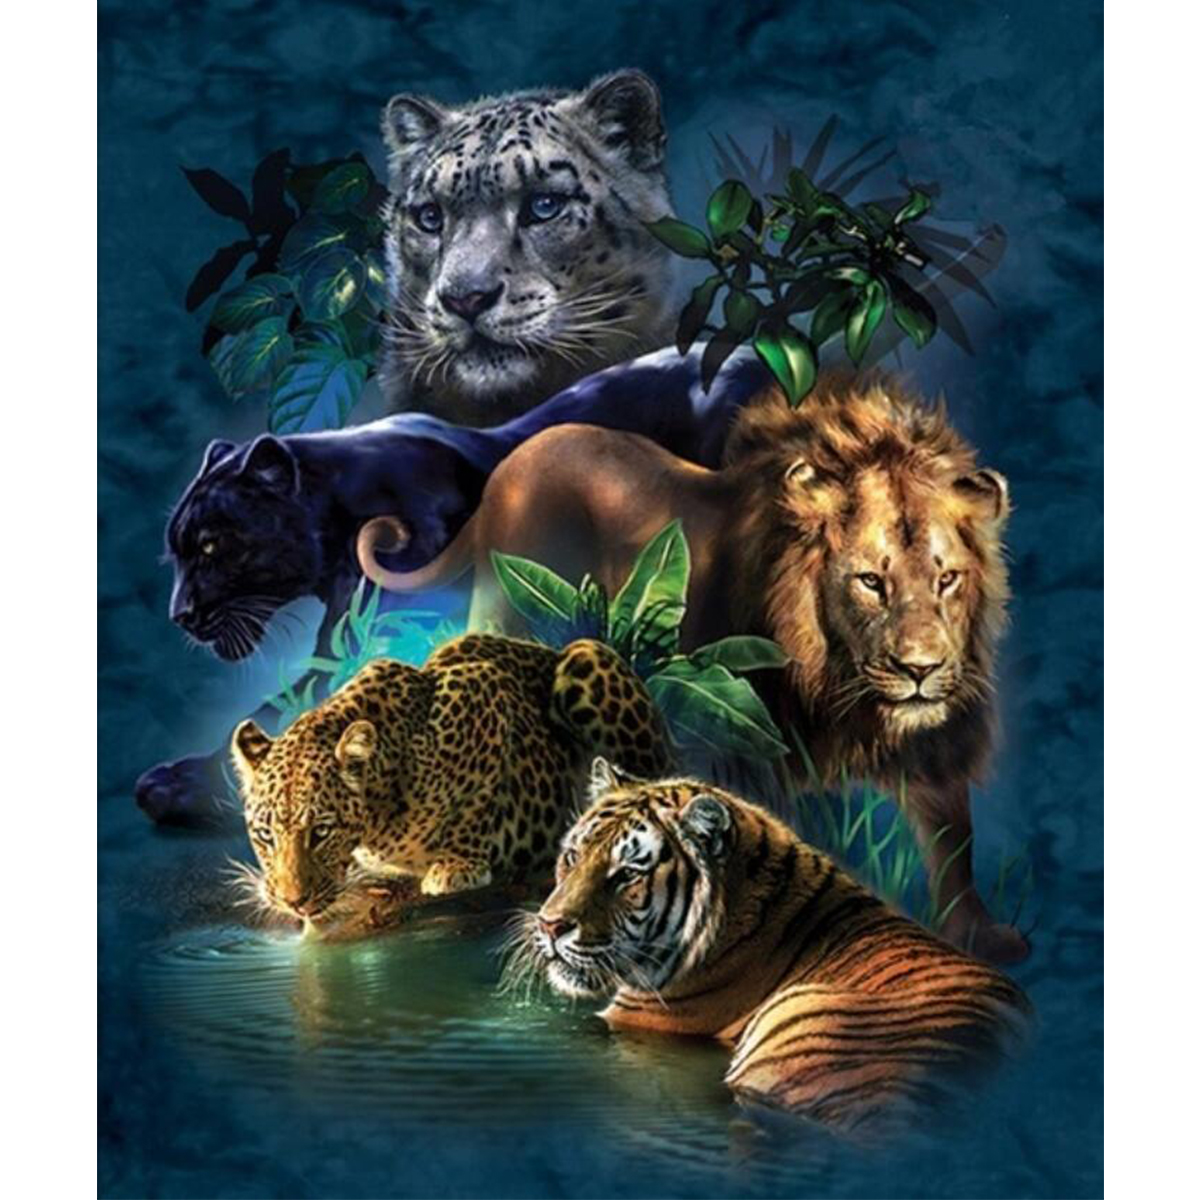 DIY-5D-Diamond-Paintings-Tiger-Lion-Embroidery-Cross-Crafts-Stitch-Tool-Kit-1633482-1